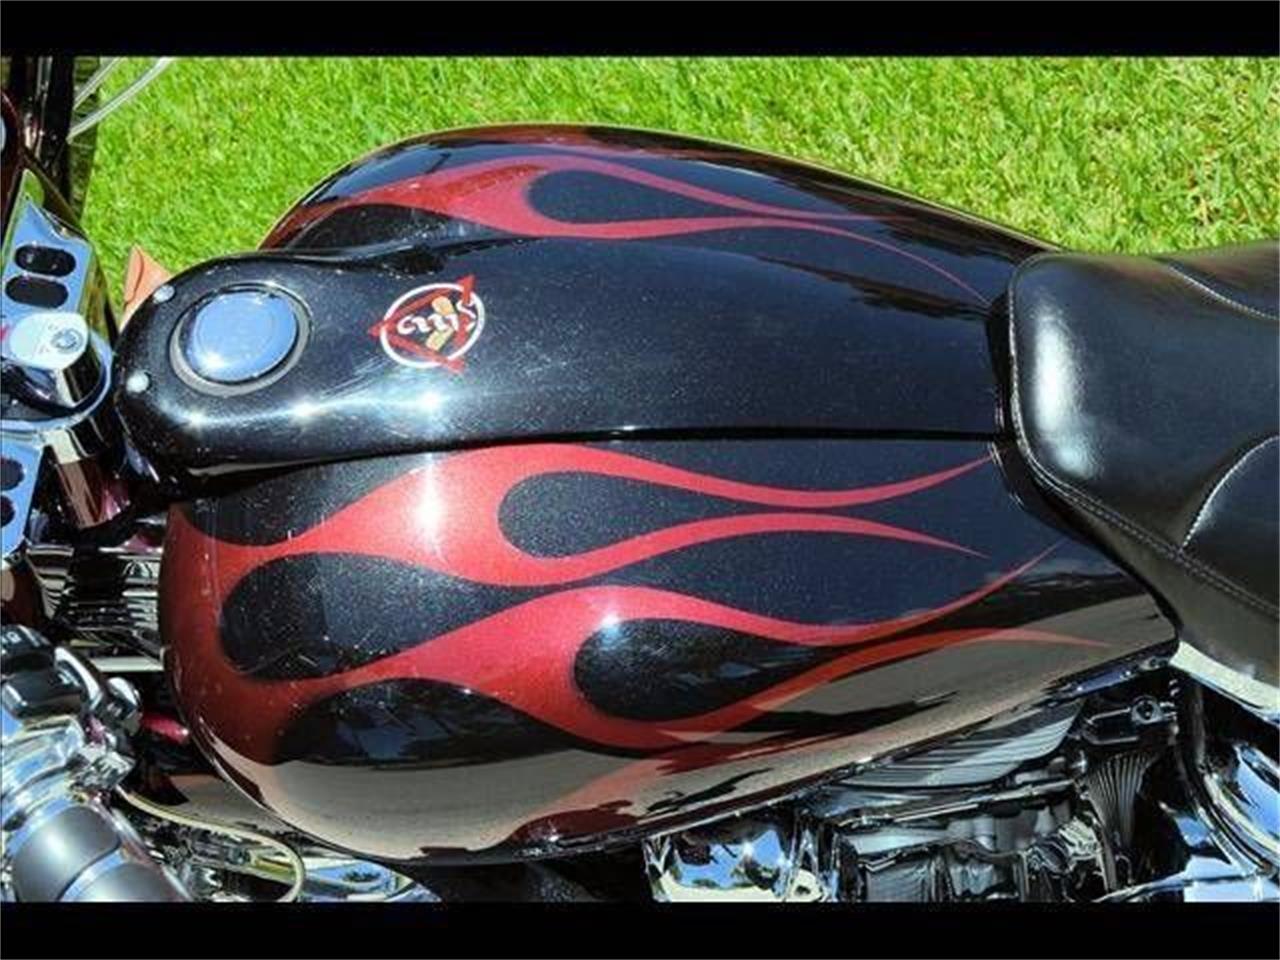 2004 Harley-Davidson Motorcycle for sale in Cadillac, MI – photo 6